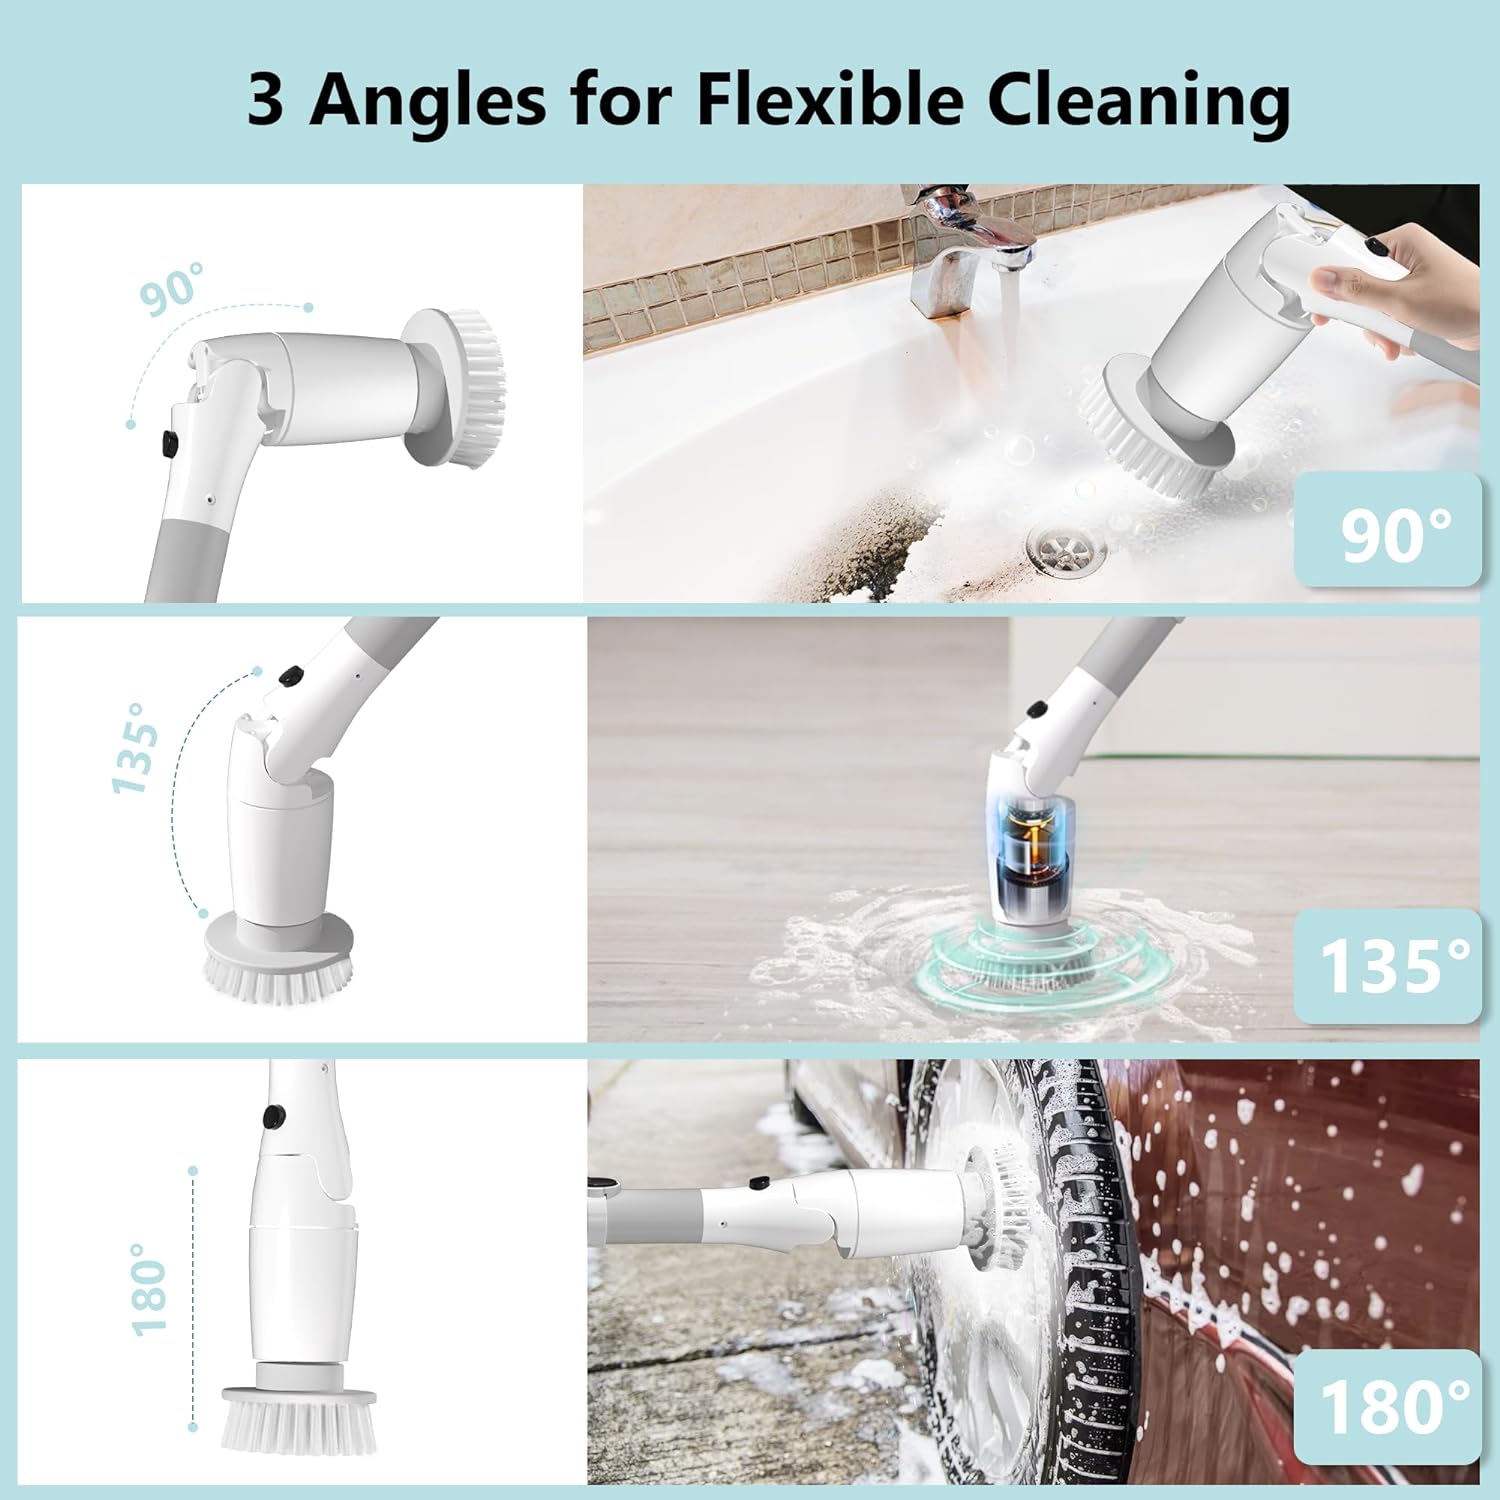 Capon Electric Spin Scrubber, 2023 Newly Upgrade Rechargeable Cordless Cleaning Brush with 8 Replaceable Brush Heads, LED Display, Power 2 Speeds, Adjustable Long Handle, for Bathroom Floor Tile Car